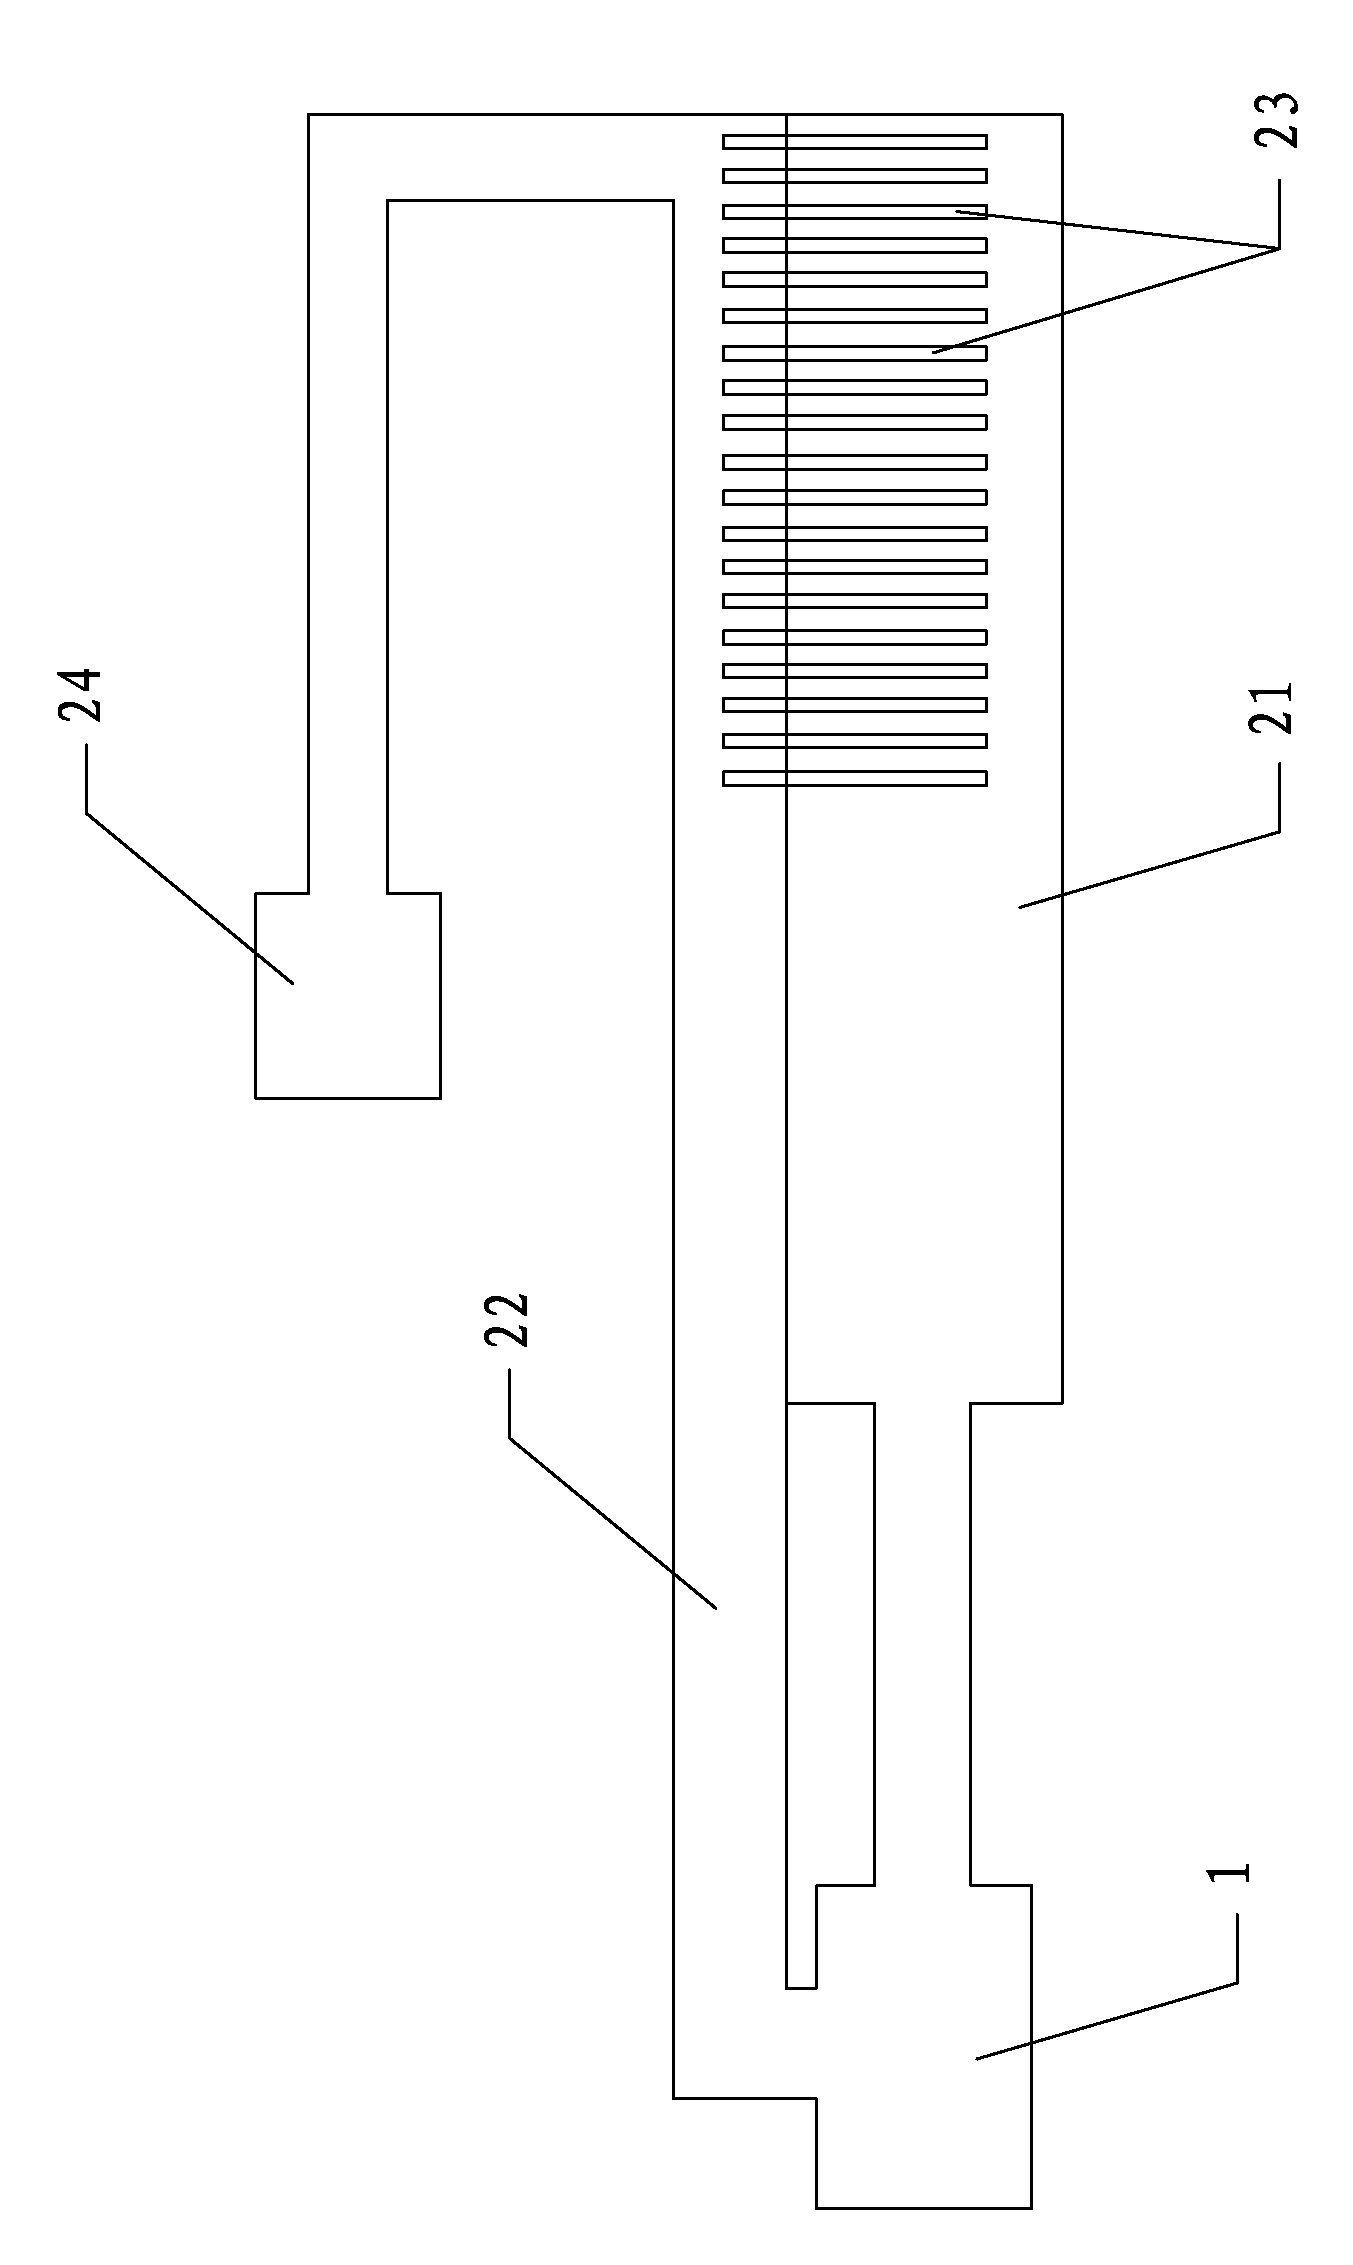 Coal-fired boiler tail gas membrane filtration enriched oxygen recycling method and device